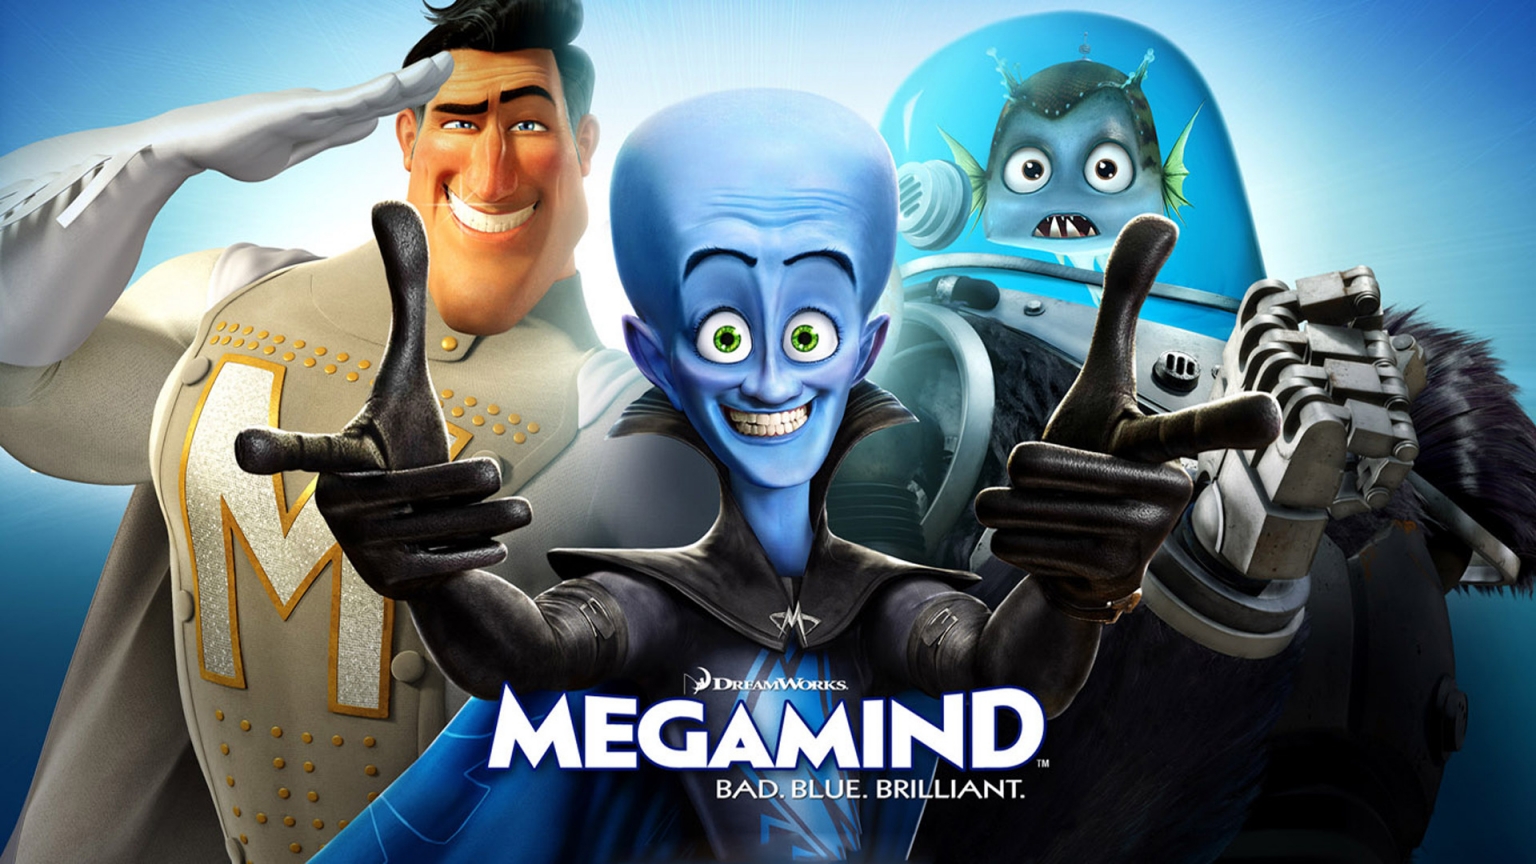 Megamind Characters for 1536 x 864 HDTV resolution